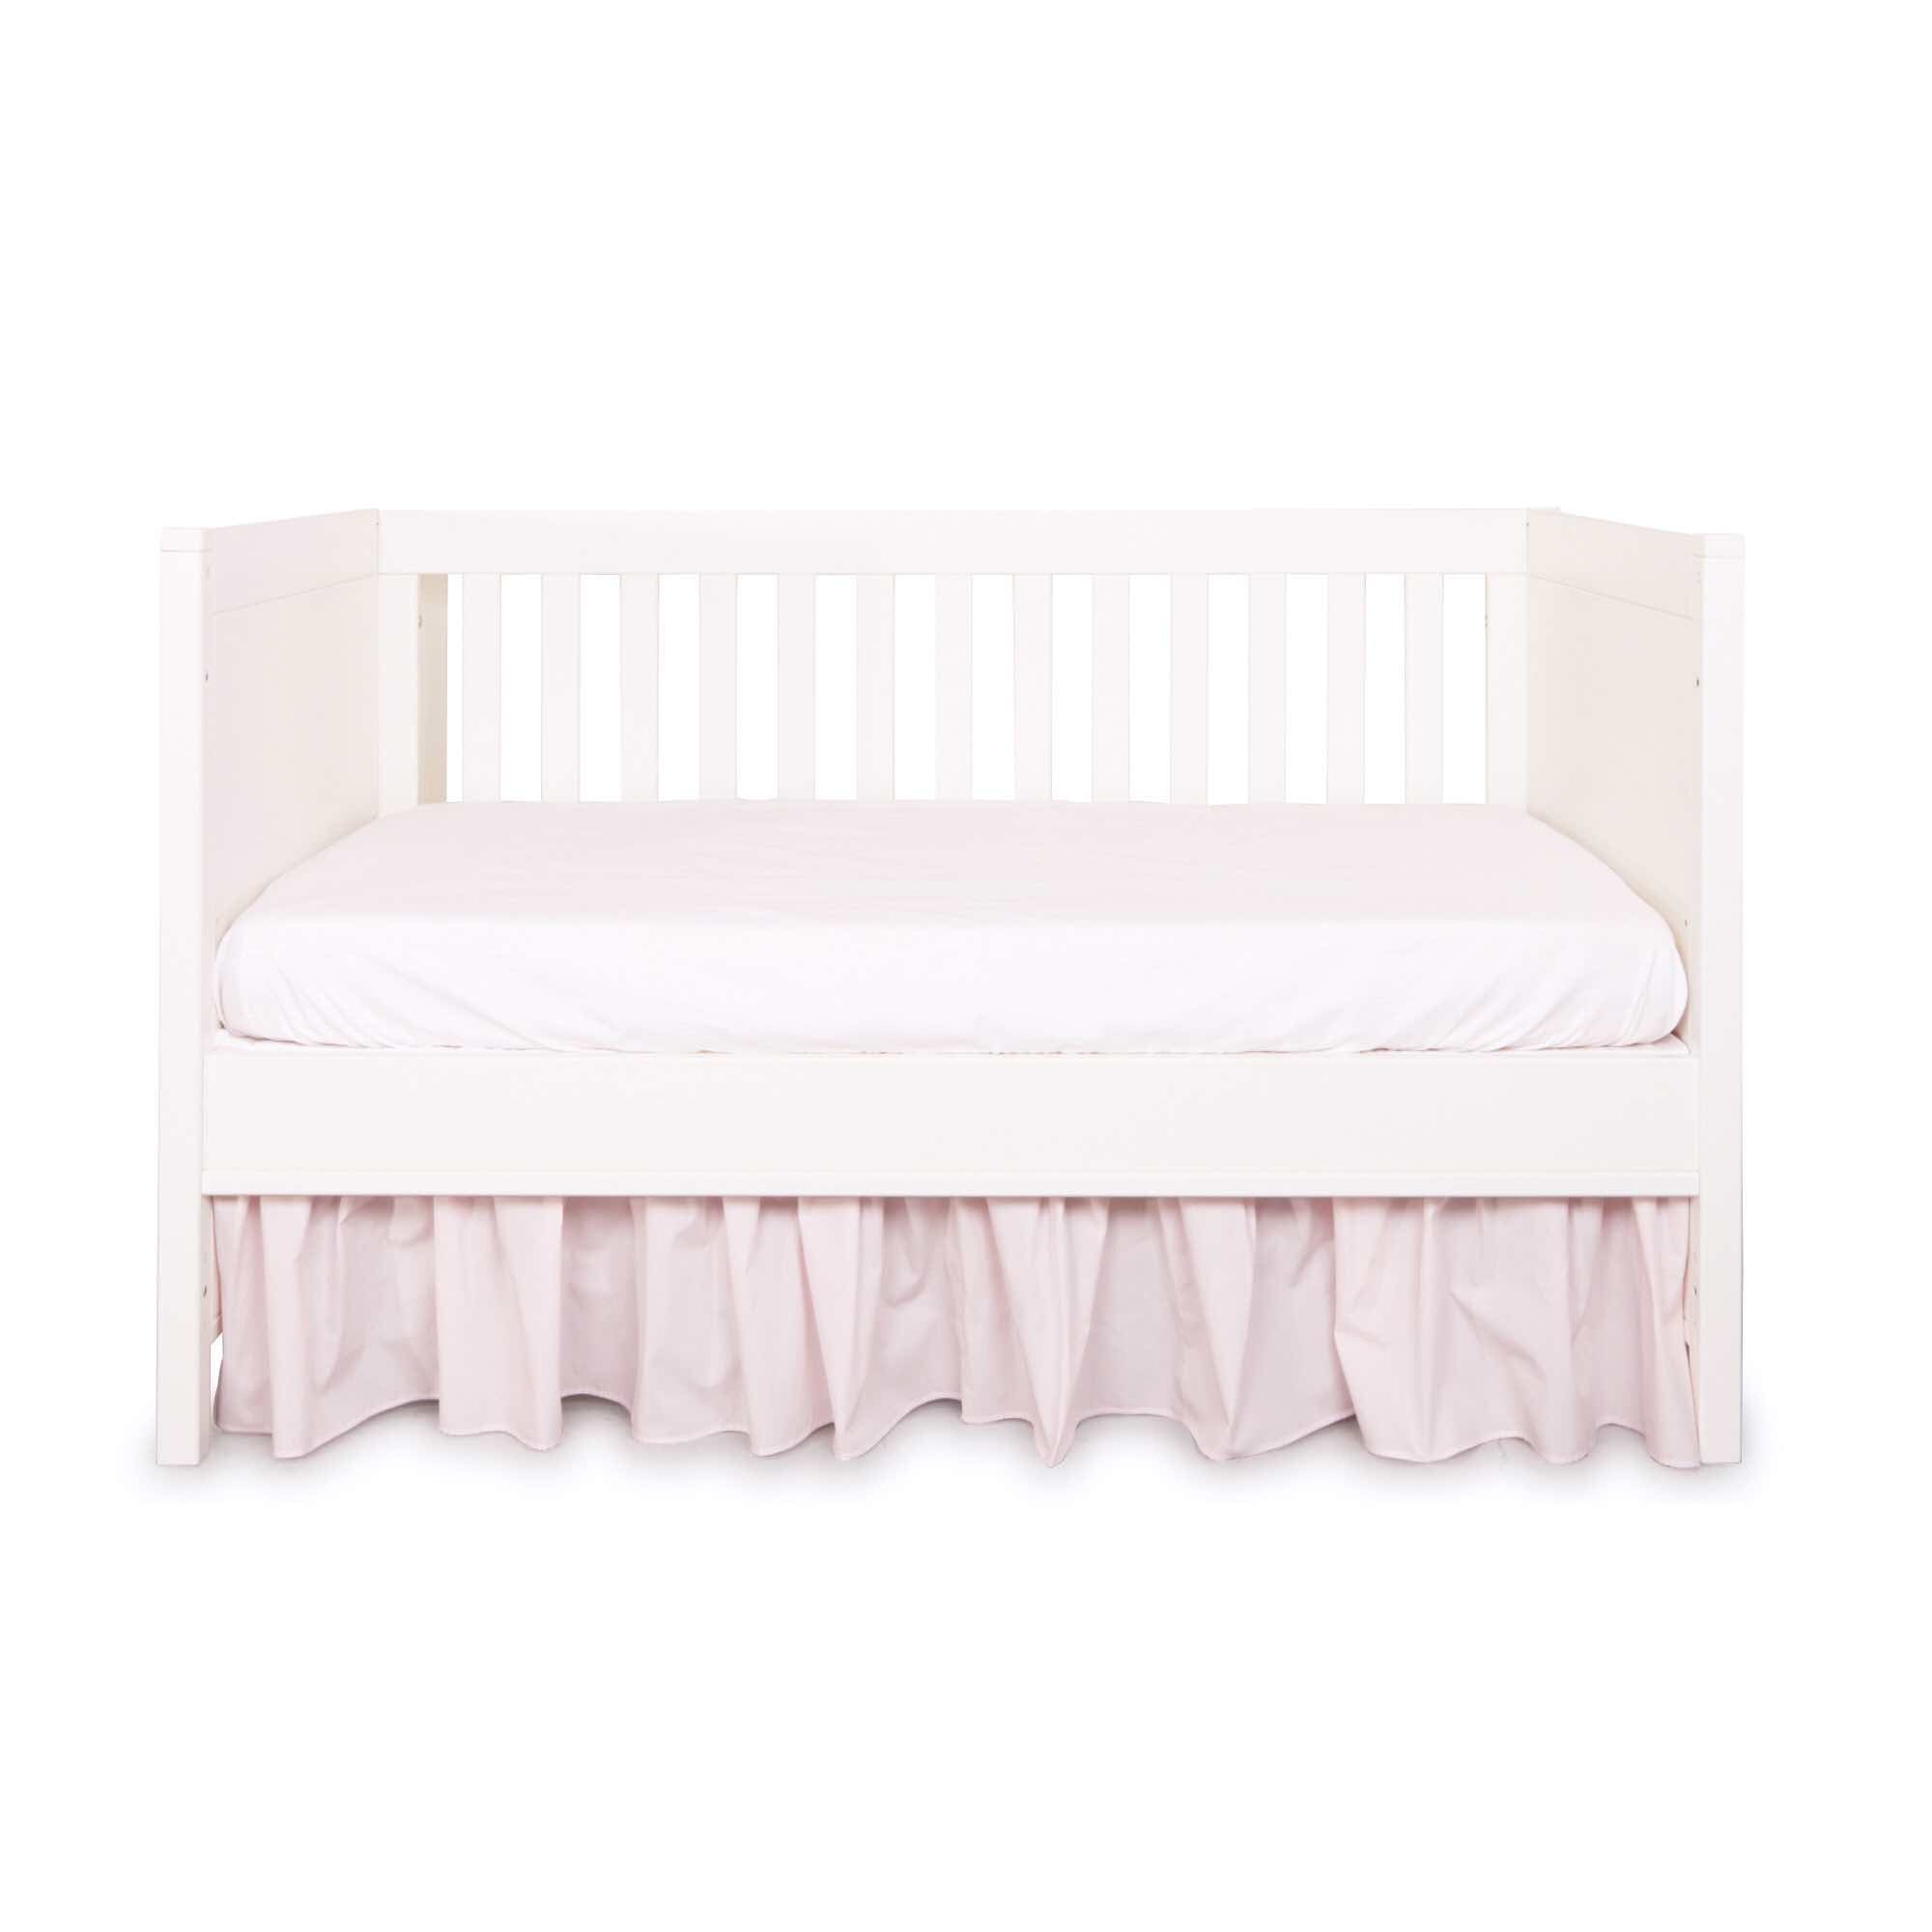 Theophile & Patachou Bed Skirt 70cm - Royal Pink